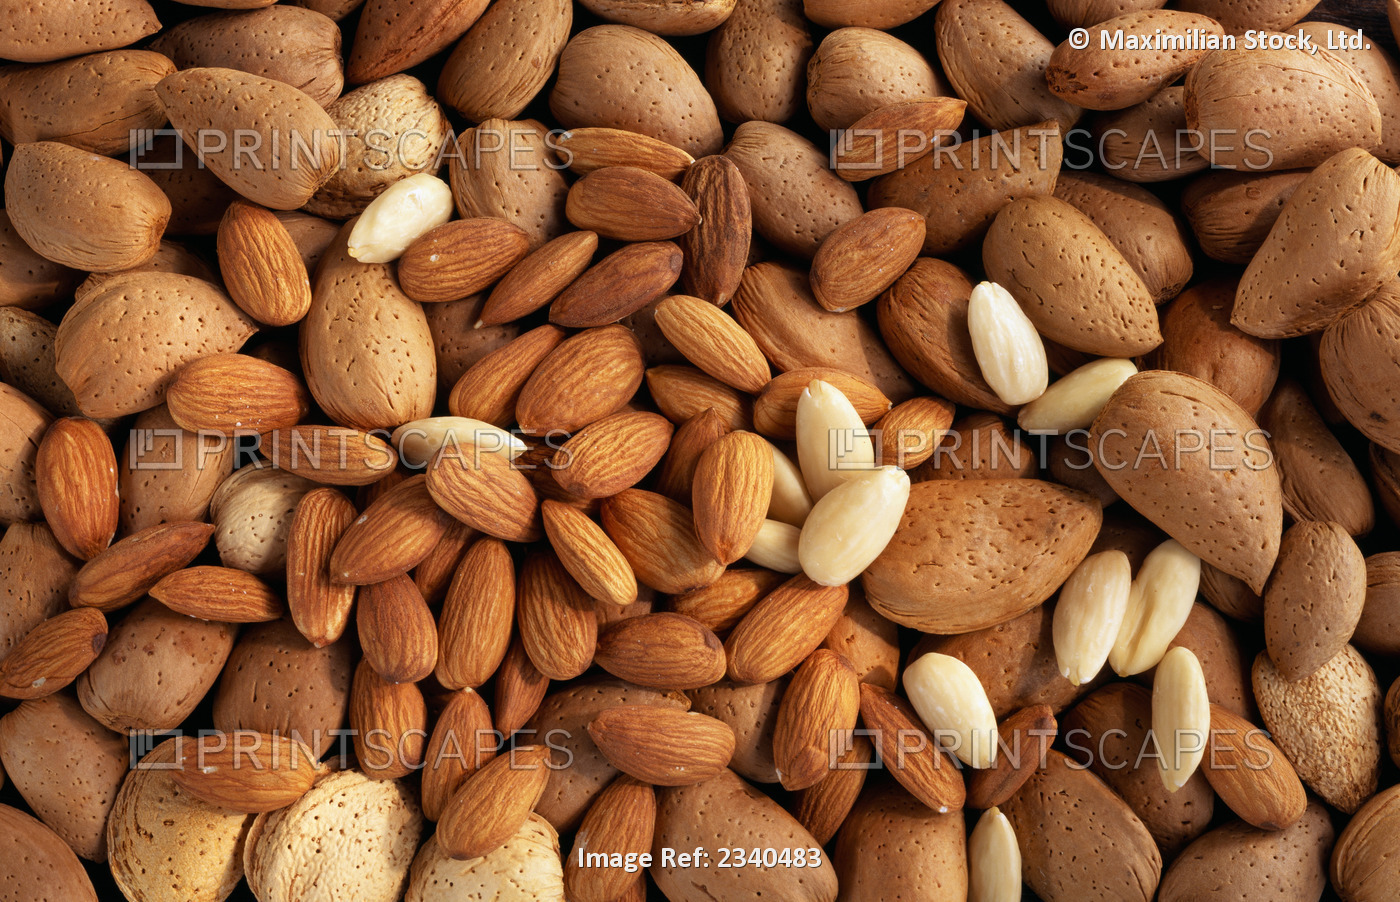 Agriculture - Full frame of shelled, pealed and unshelled almonds, studio.